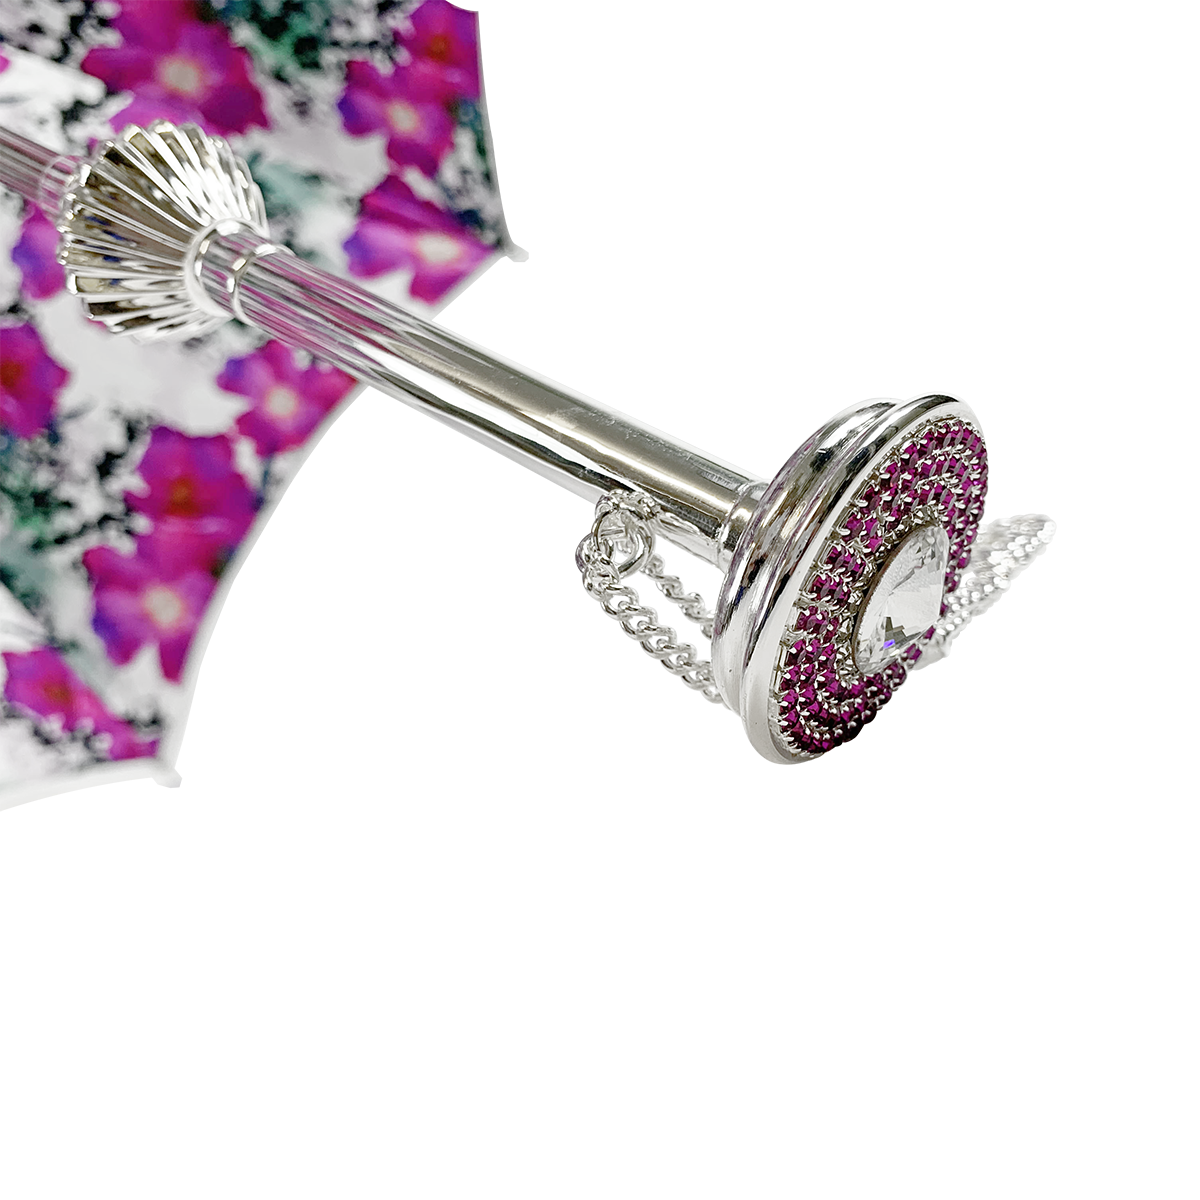 Silvered Umbrella with Anemones and Fuchsia Crystals